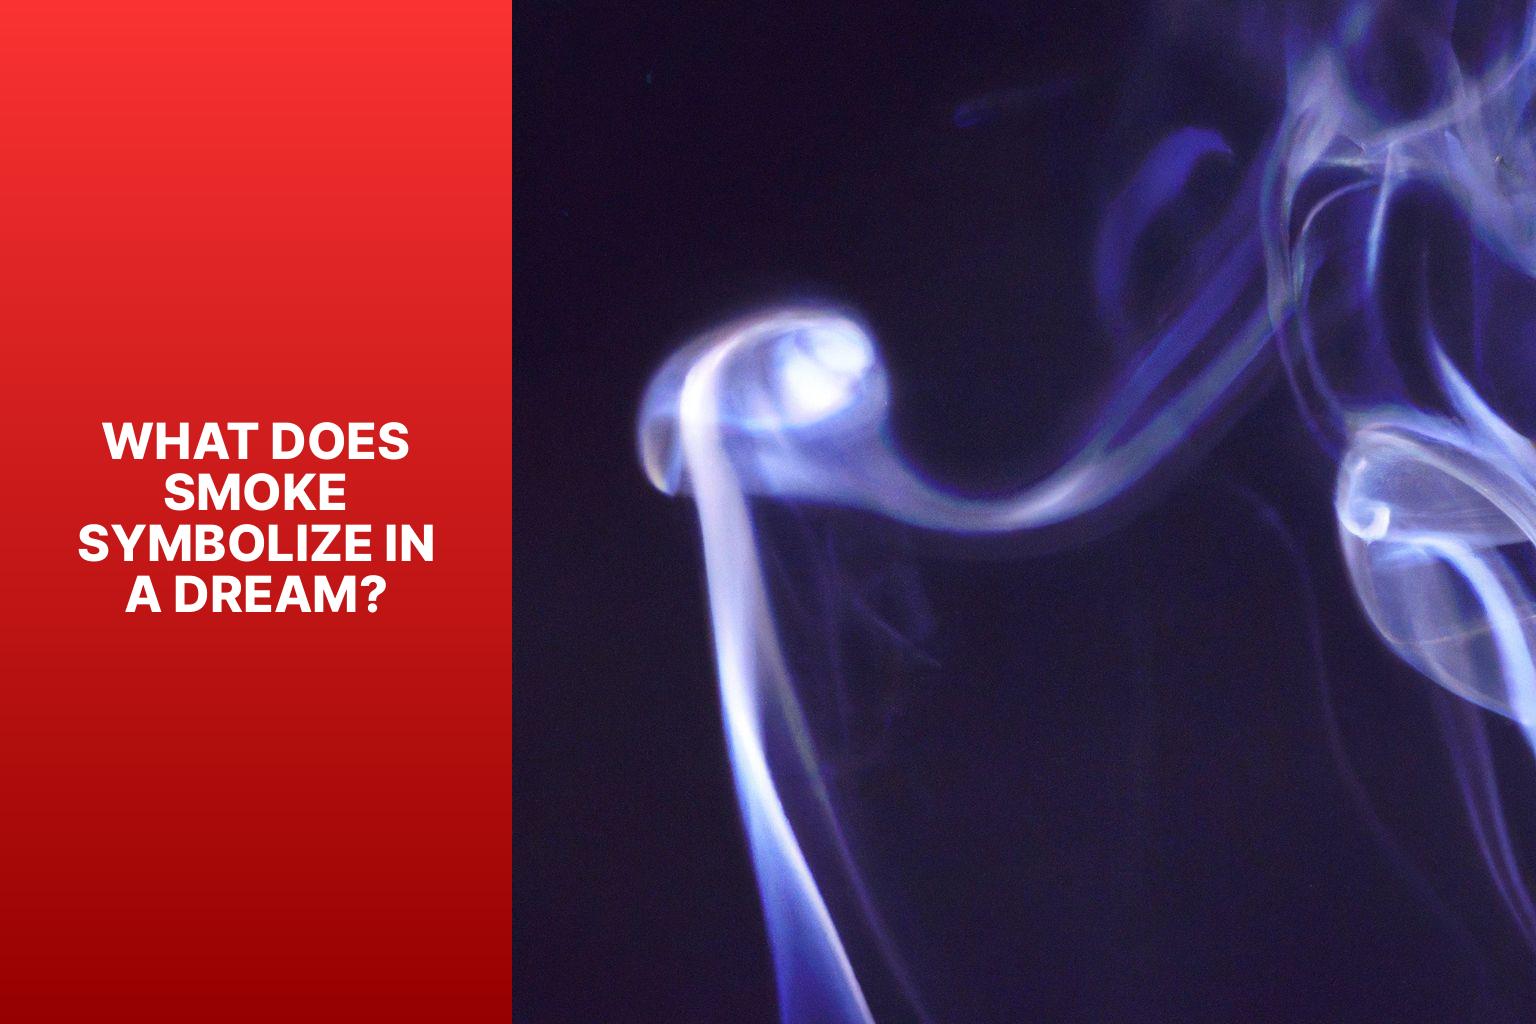 What Does Smoke Symbolize in a Dream? - spiritual meaning of smoke in a dream 